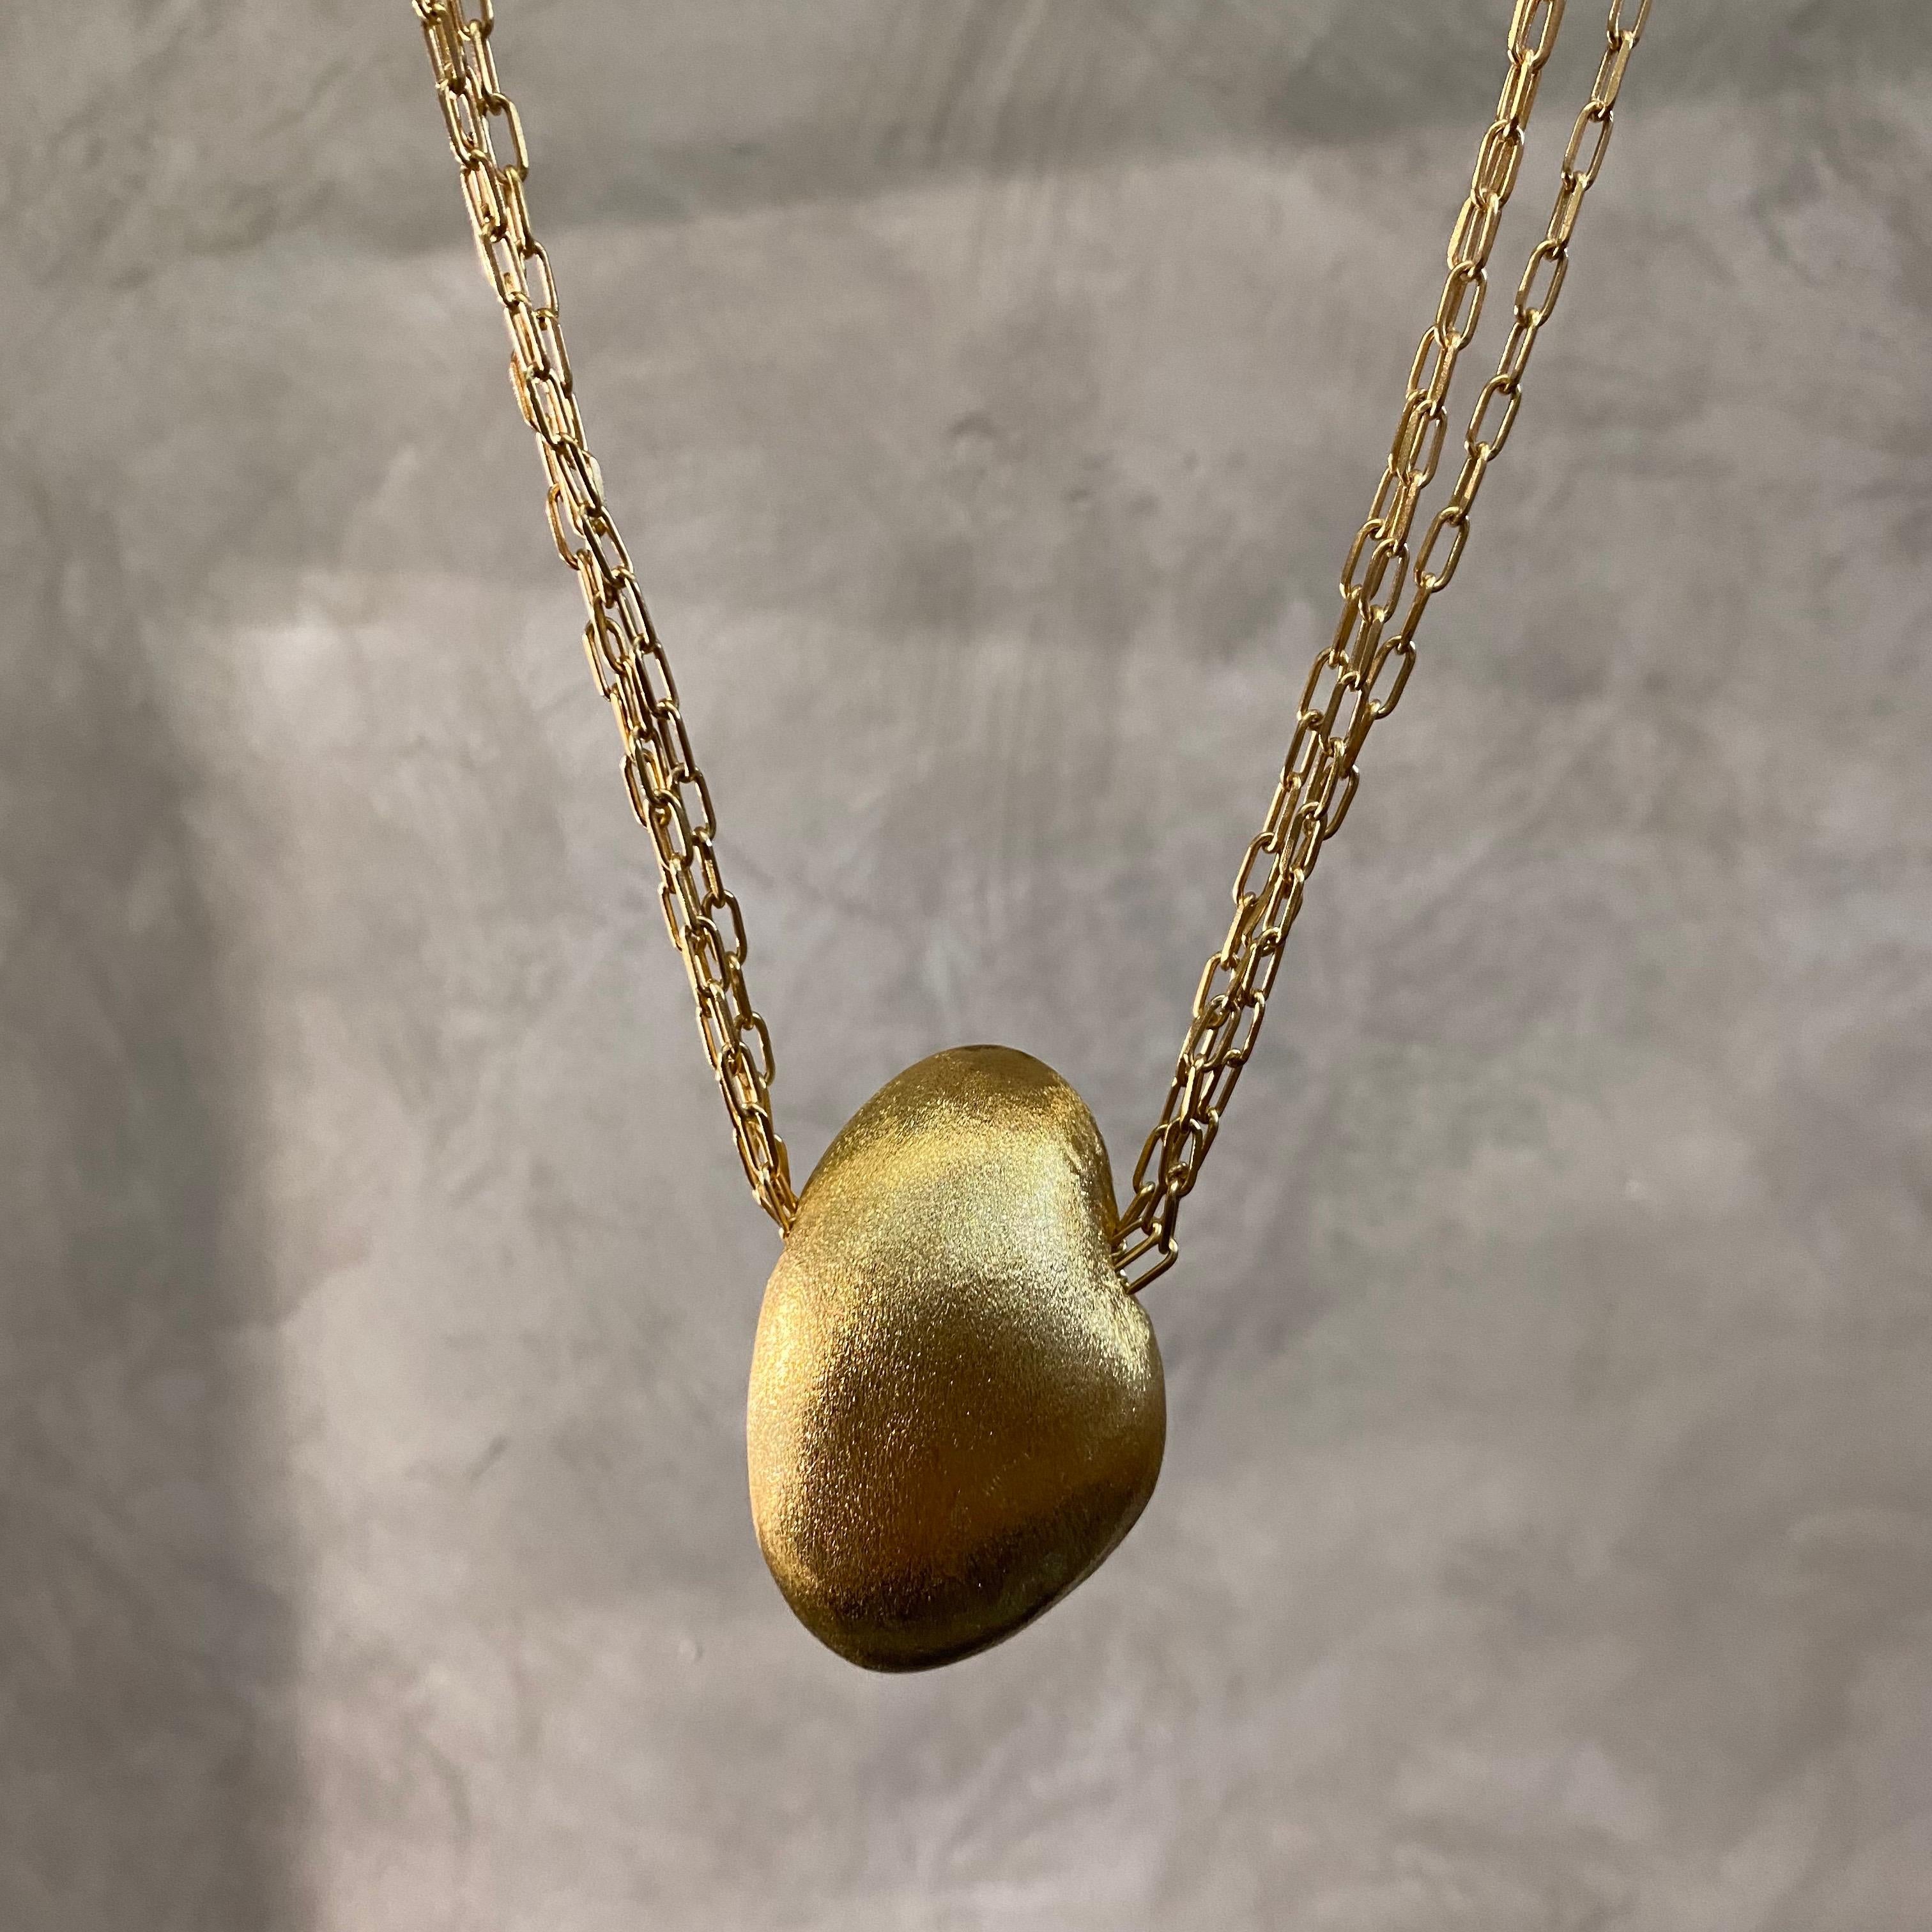 H. Stern Textured Golden Stone Pedras Roladas Maior Pendant Necklace Yellow Gold For Sale 4